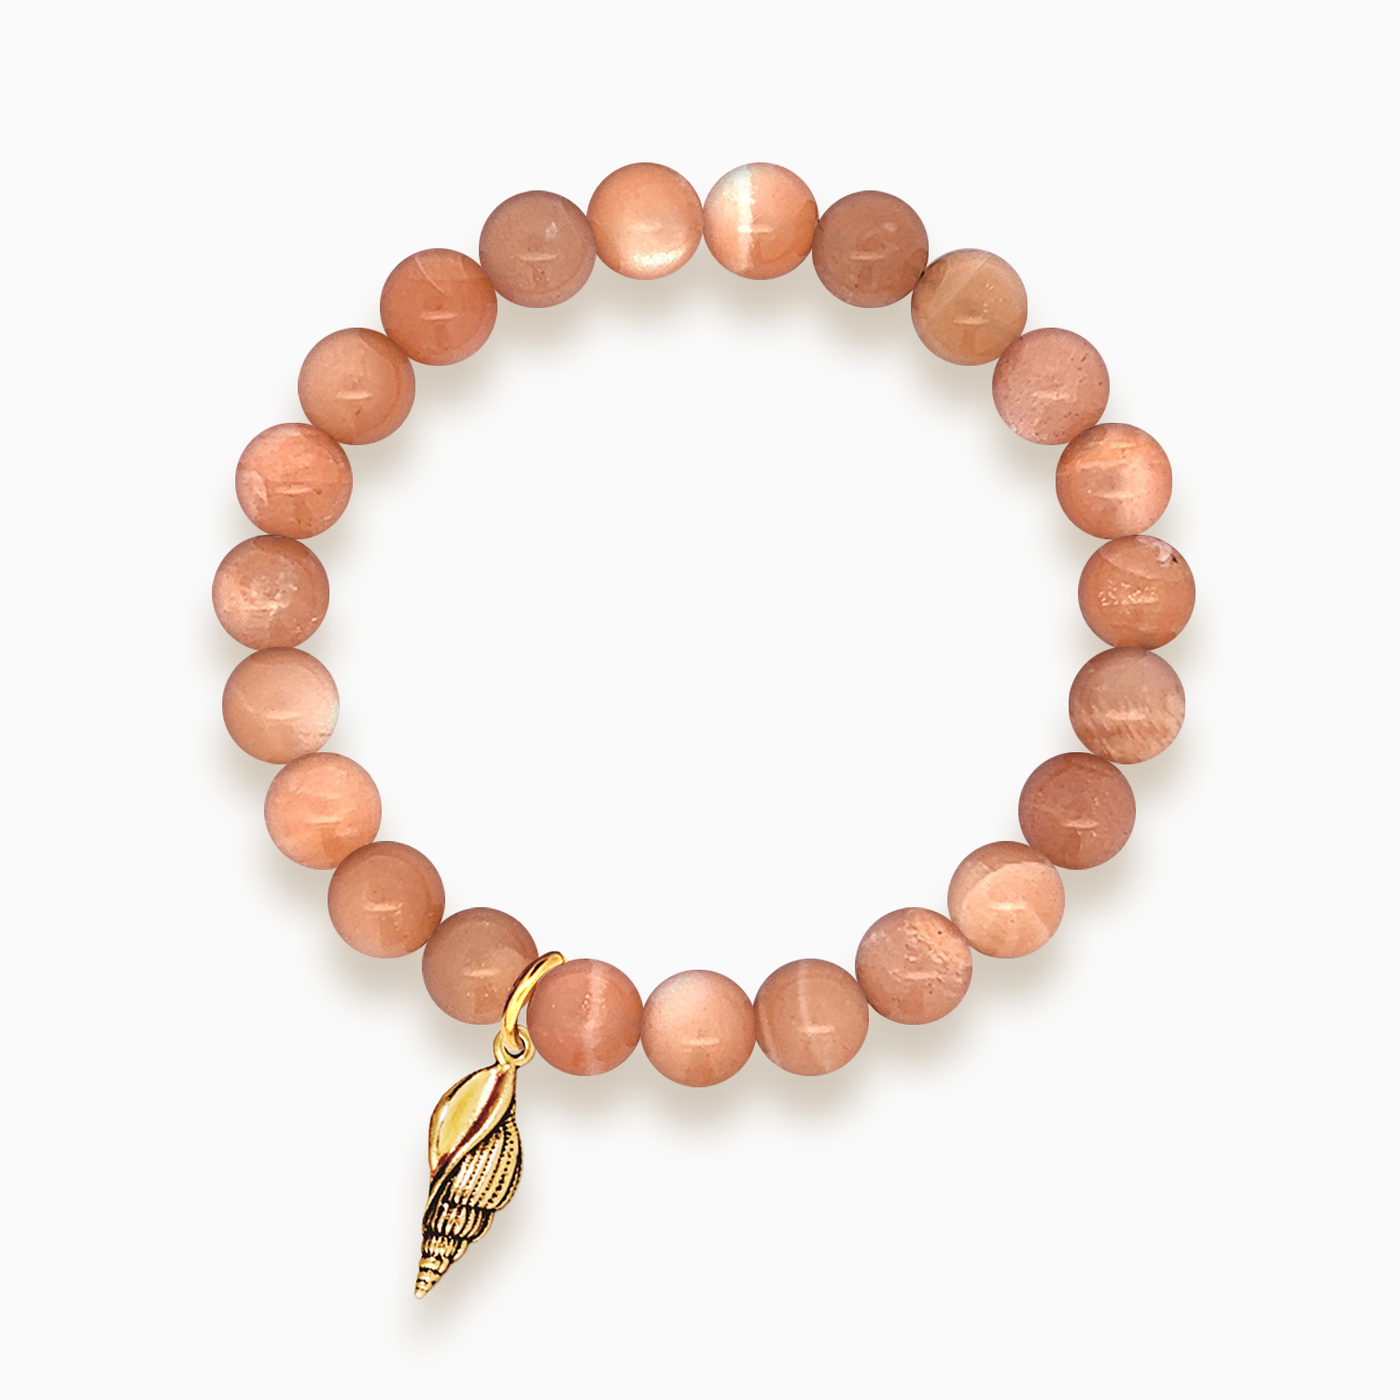 Gemstone Stacker Bracelet With Gold Plated Spiral Shell Charm